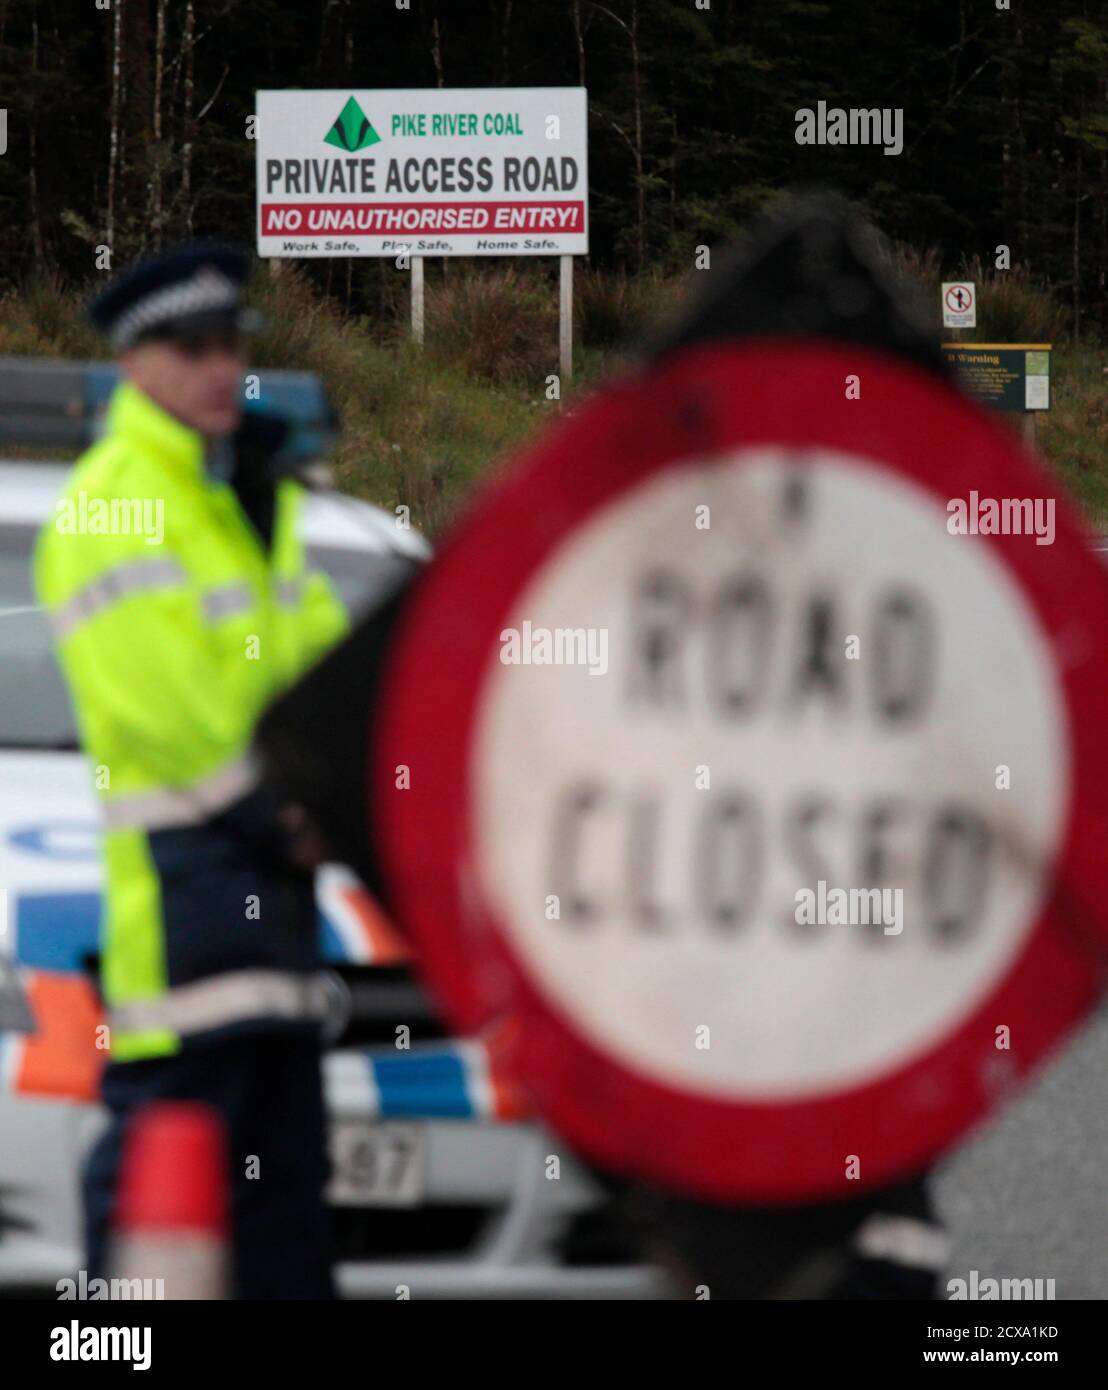 A New Zealand policeman stands at a road block on the road leading to the Pike River coal mine November 20, 2010, where 29 miners are trapped following an underground explosion on Friday. New Zealand rescuers have yet to make contact with the trapped miners as fears of lethal gas levels prevented any chance of a rescue on Saturday, 24 hours after the explosion ripped through the remote colliery dug into the side of a mountain.          REUTERS/Tim Wimborne    (NEW ZEALAND - Tags: DISASTER) Stock Photo